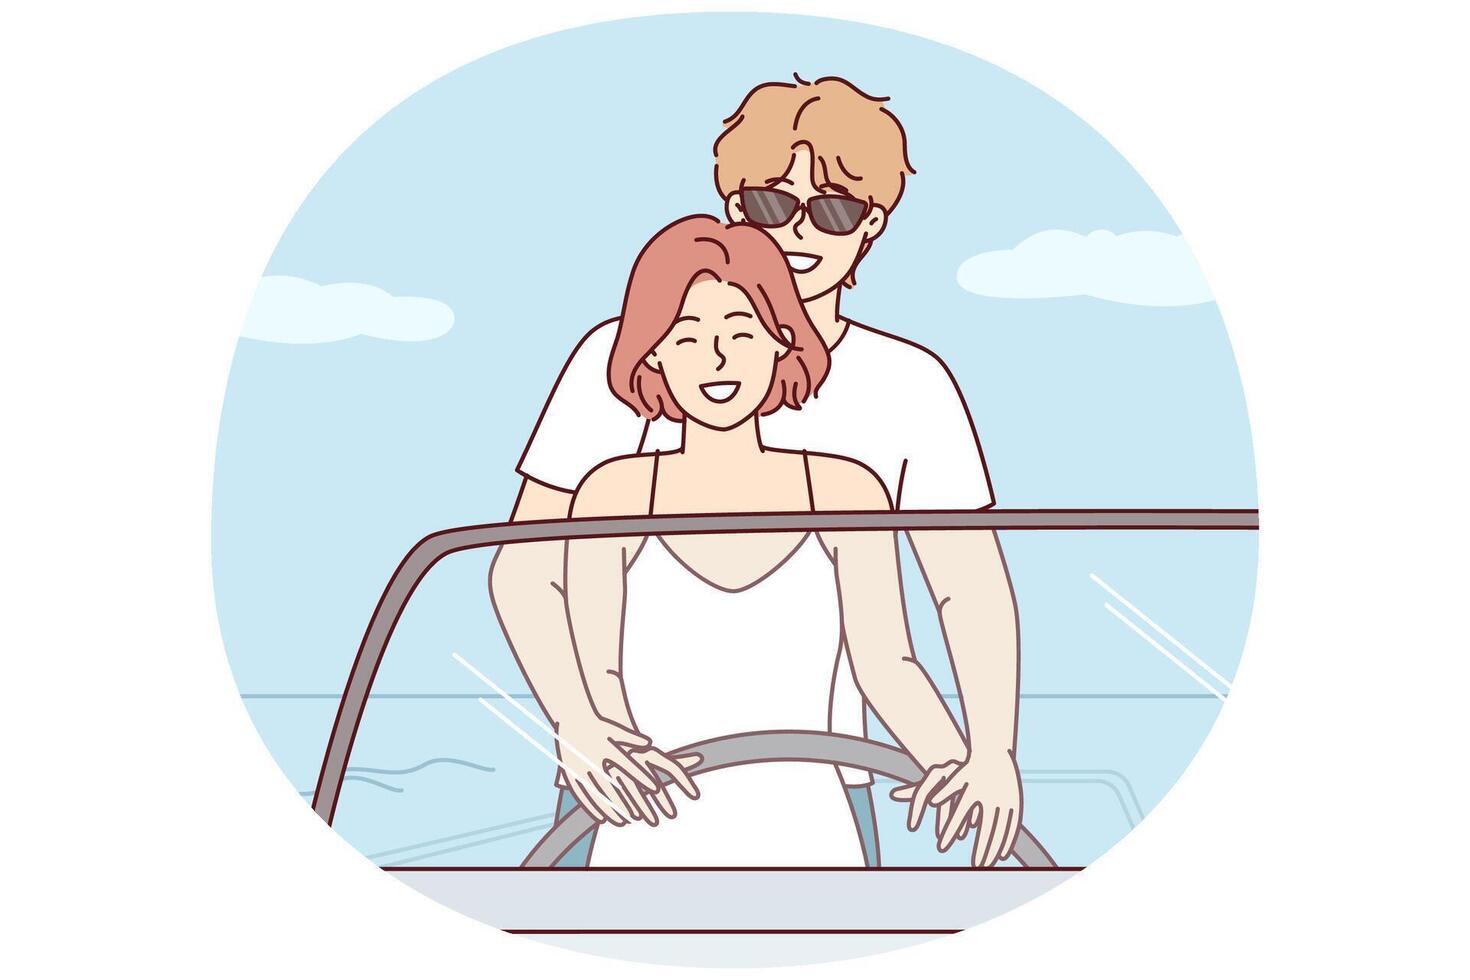 Romantic man and woman at same time control boat holding helm enjoying summer vacation. Vector image